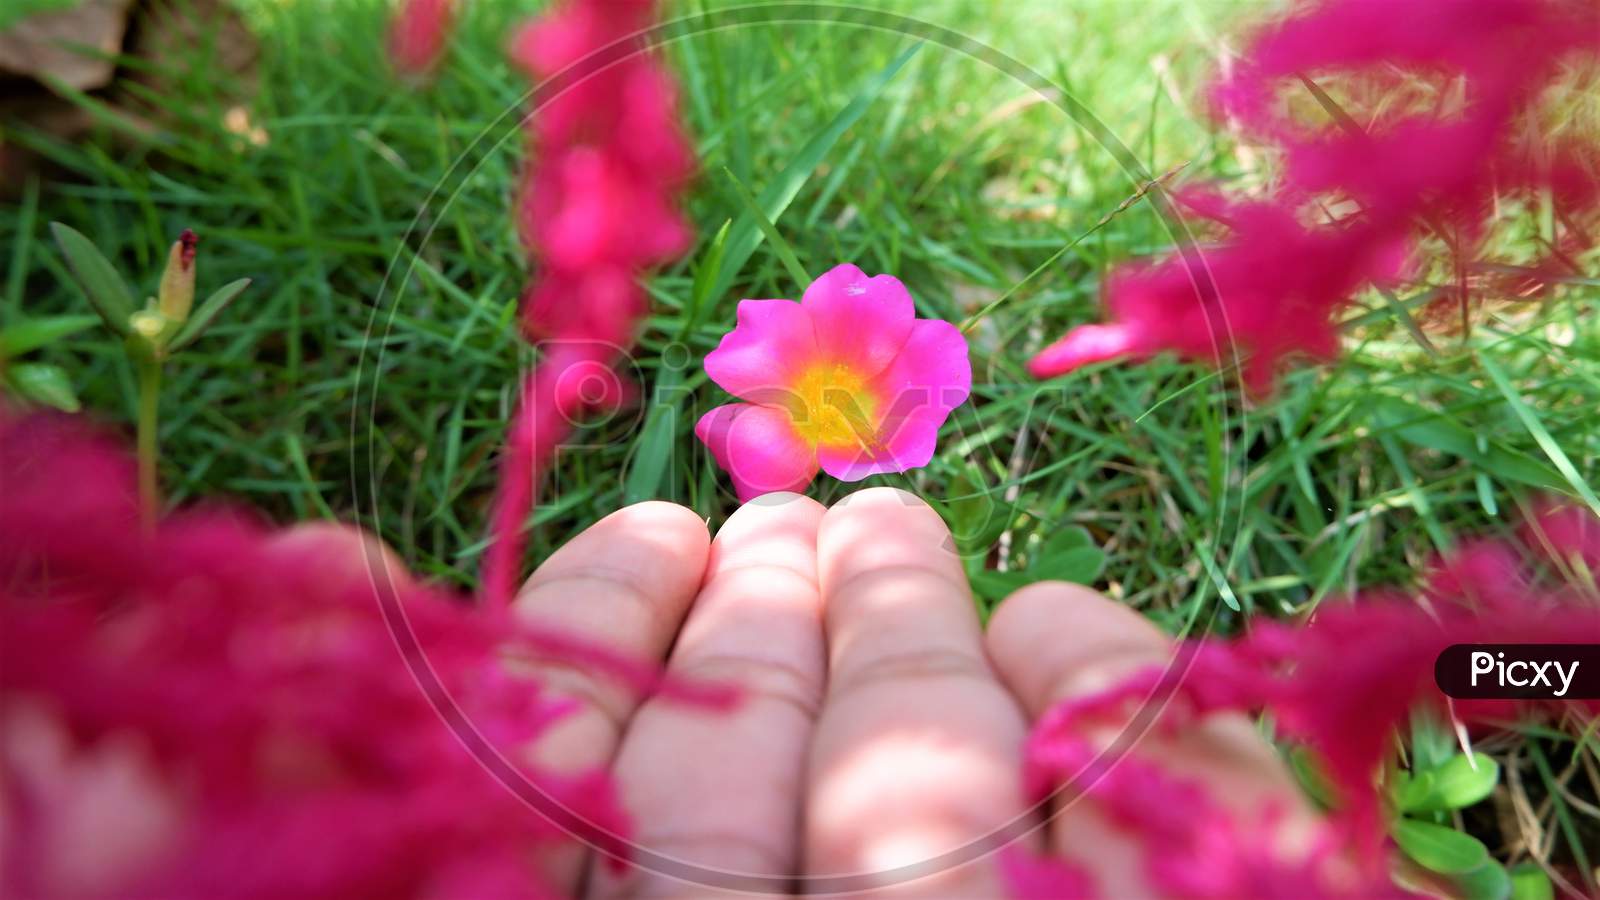 hand and beautiful flower in close up images